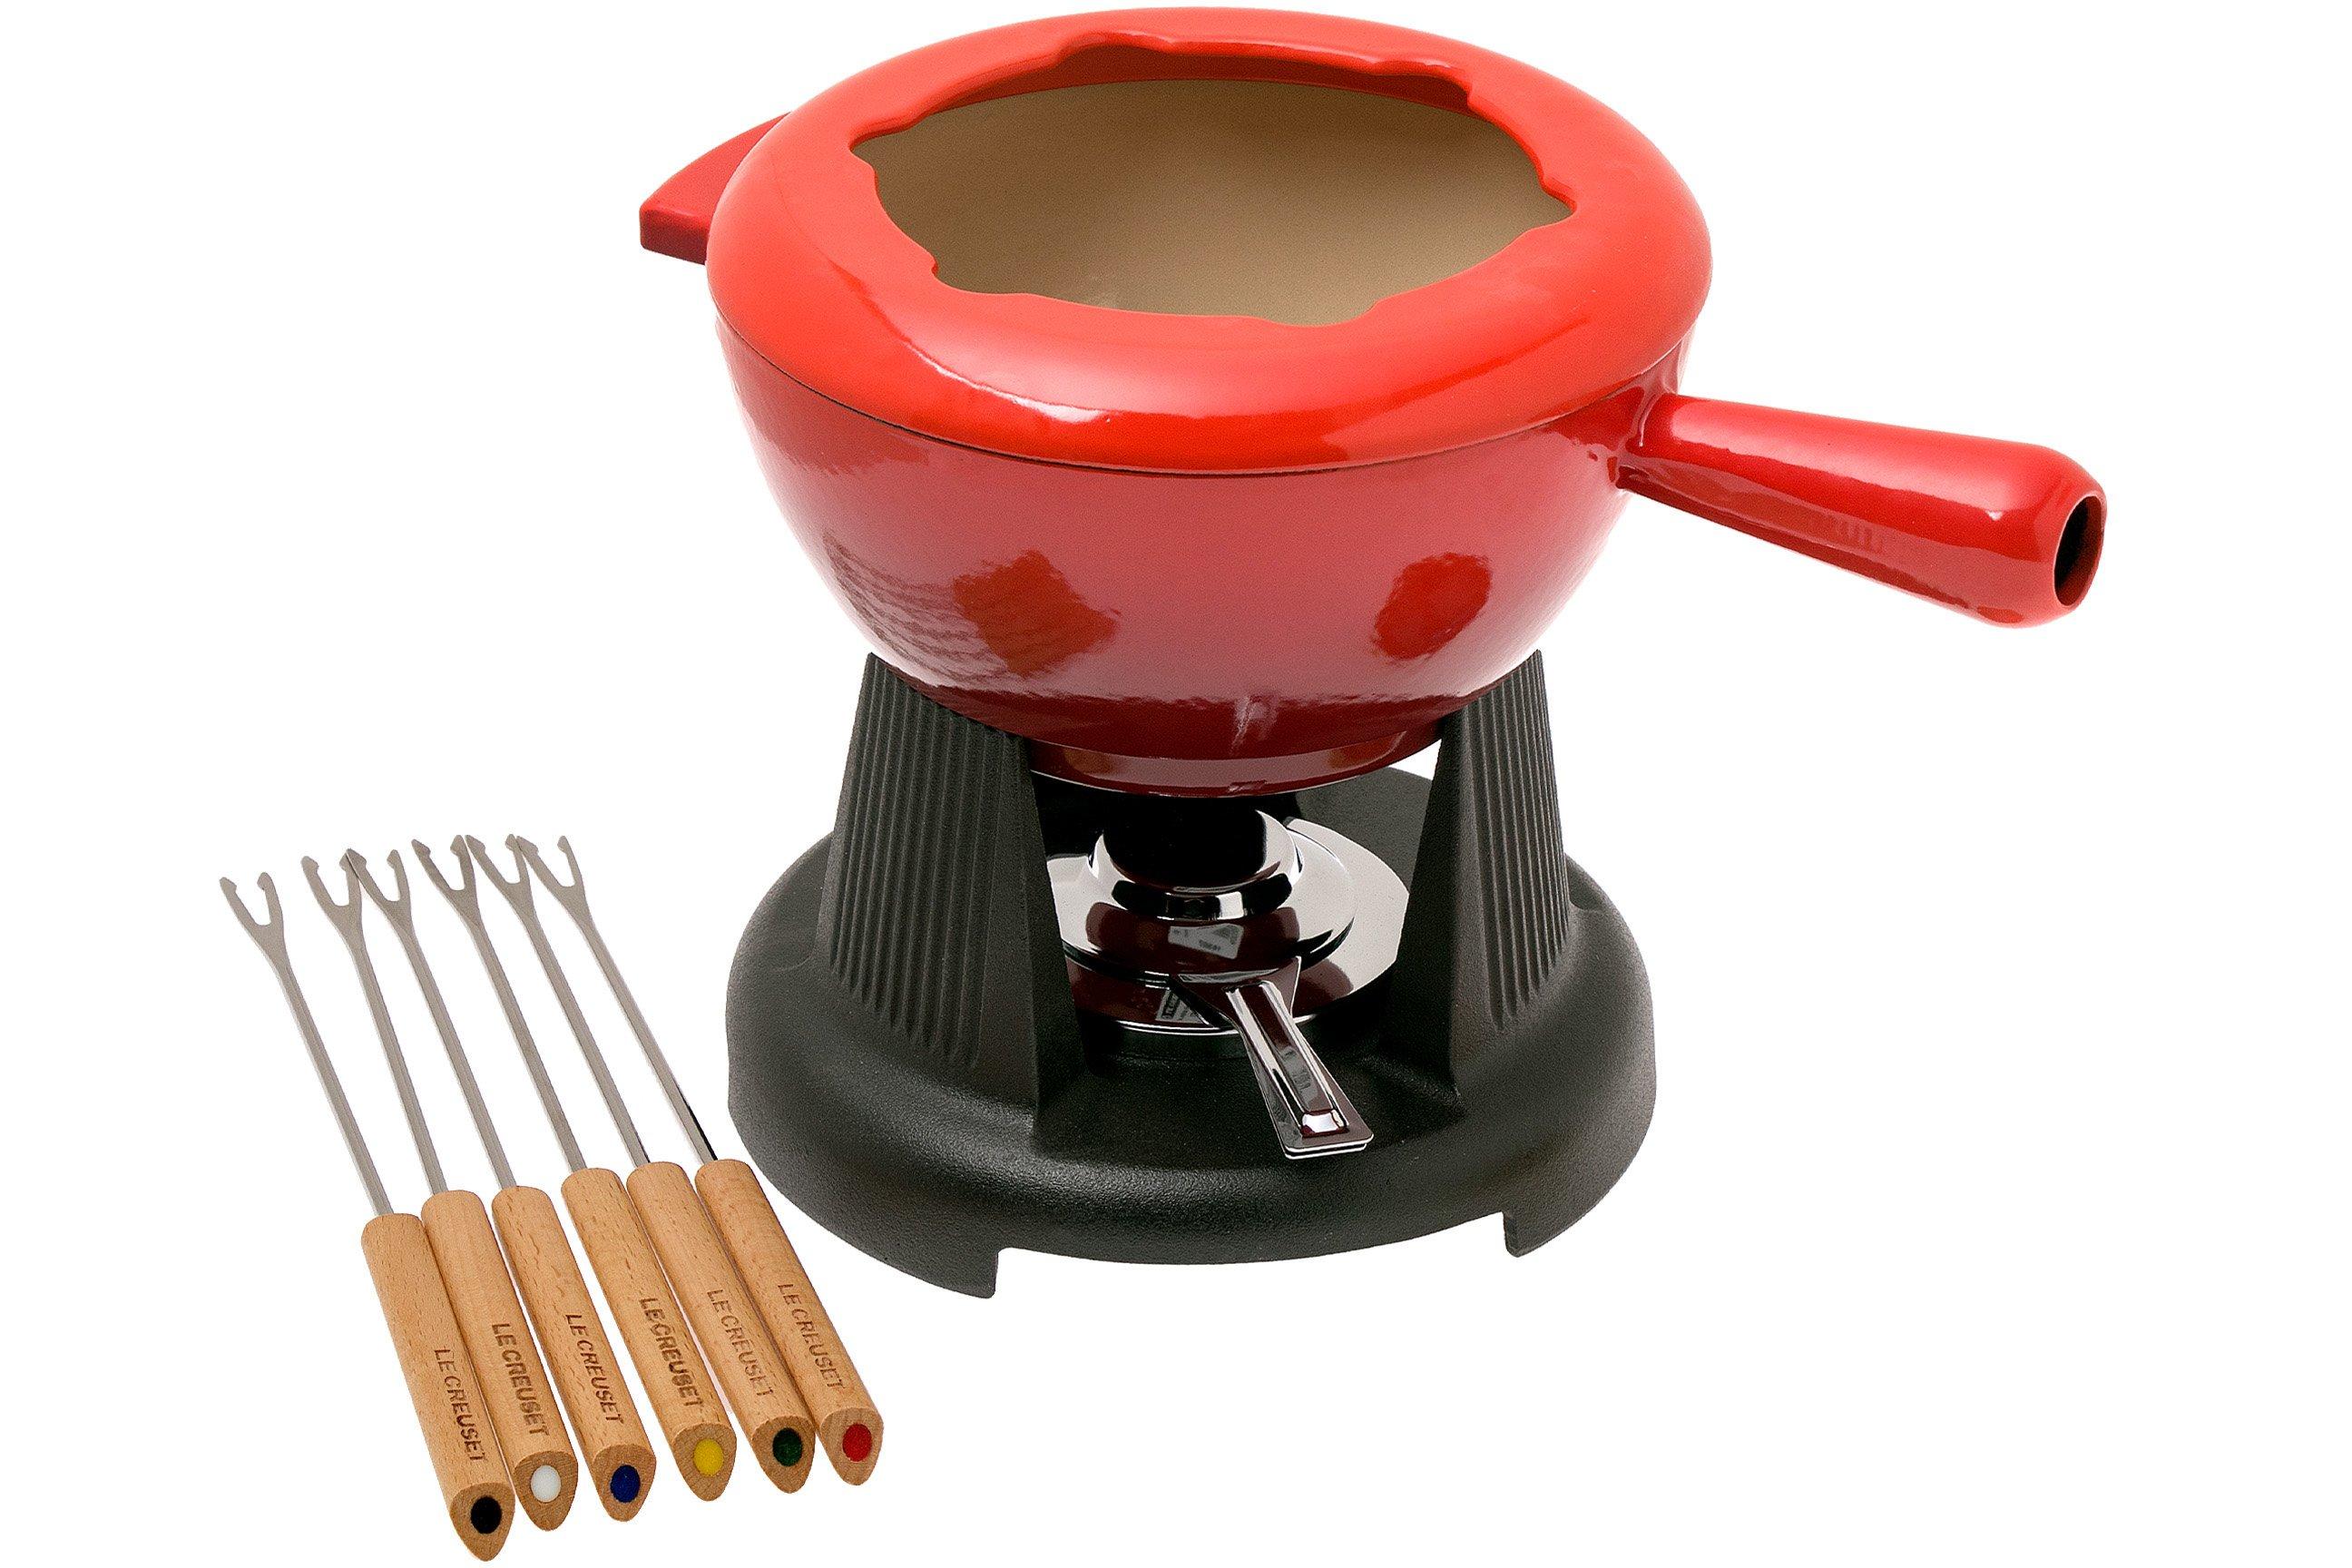 Transparant Normaal zuiden Le Creuset fondue set with cast-iron handles, 2L, cherry red |  Advantageously shopping at Knivesandtools.com